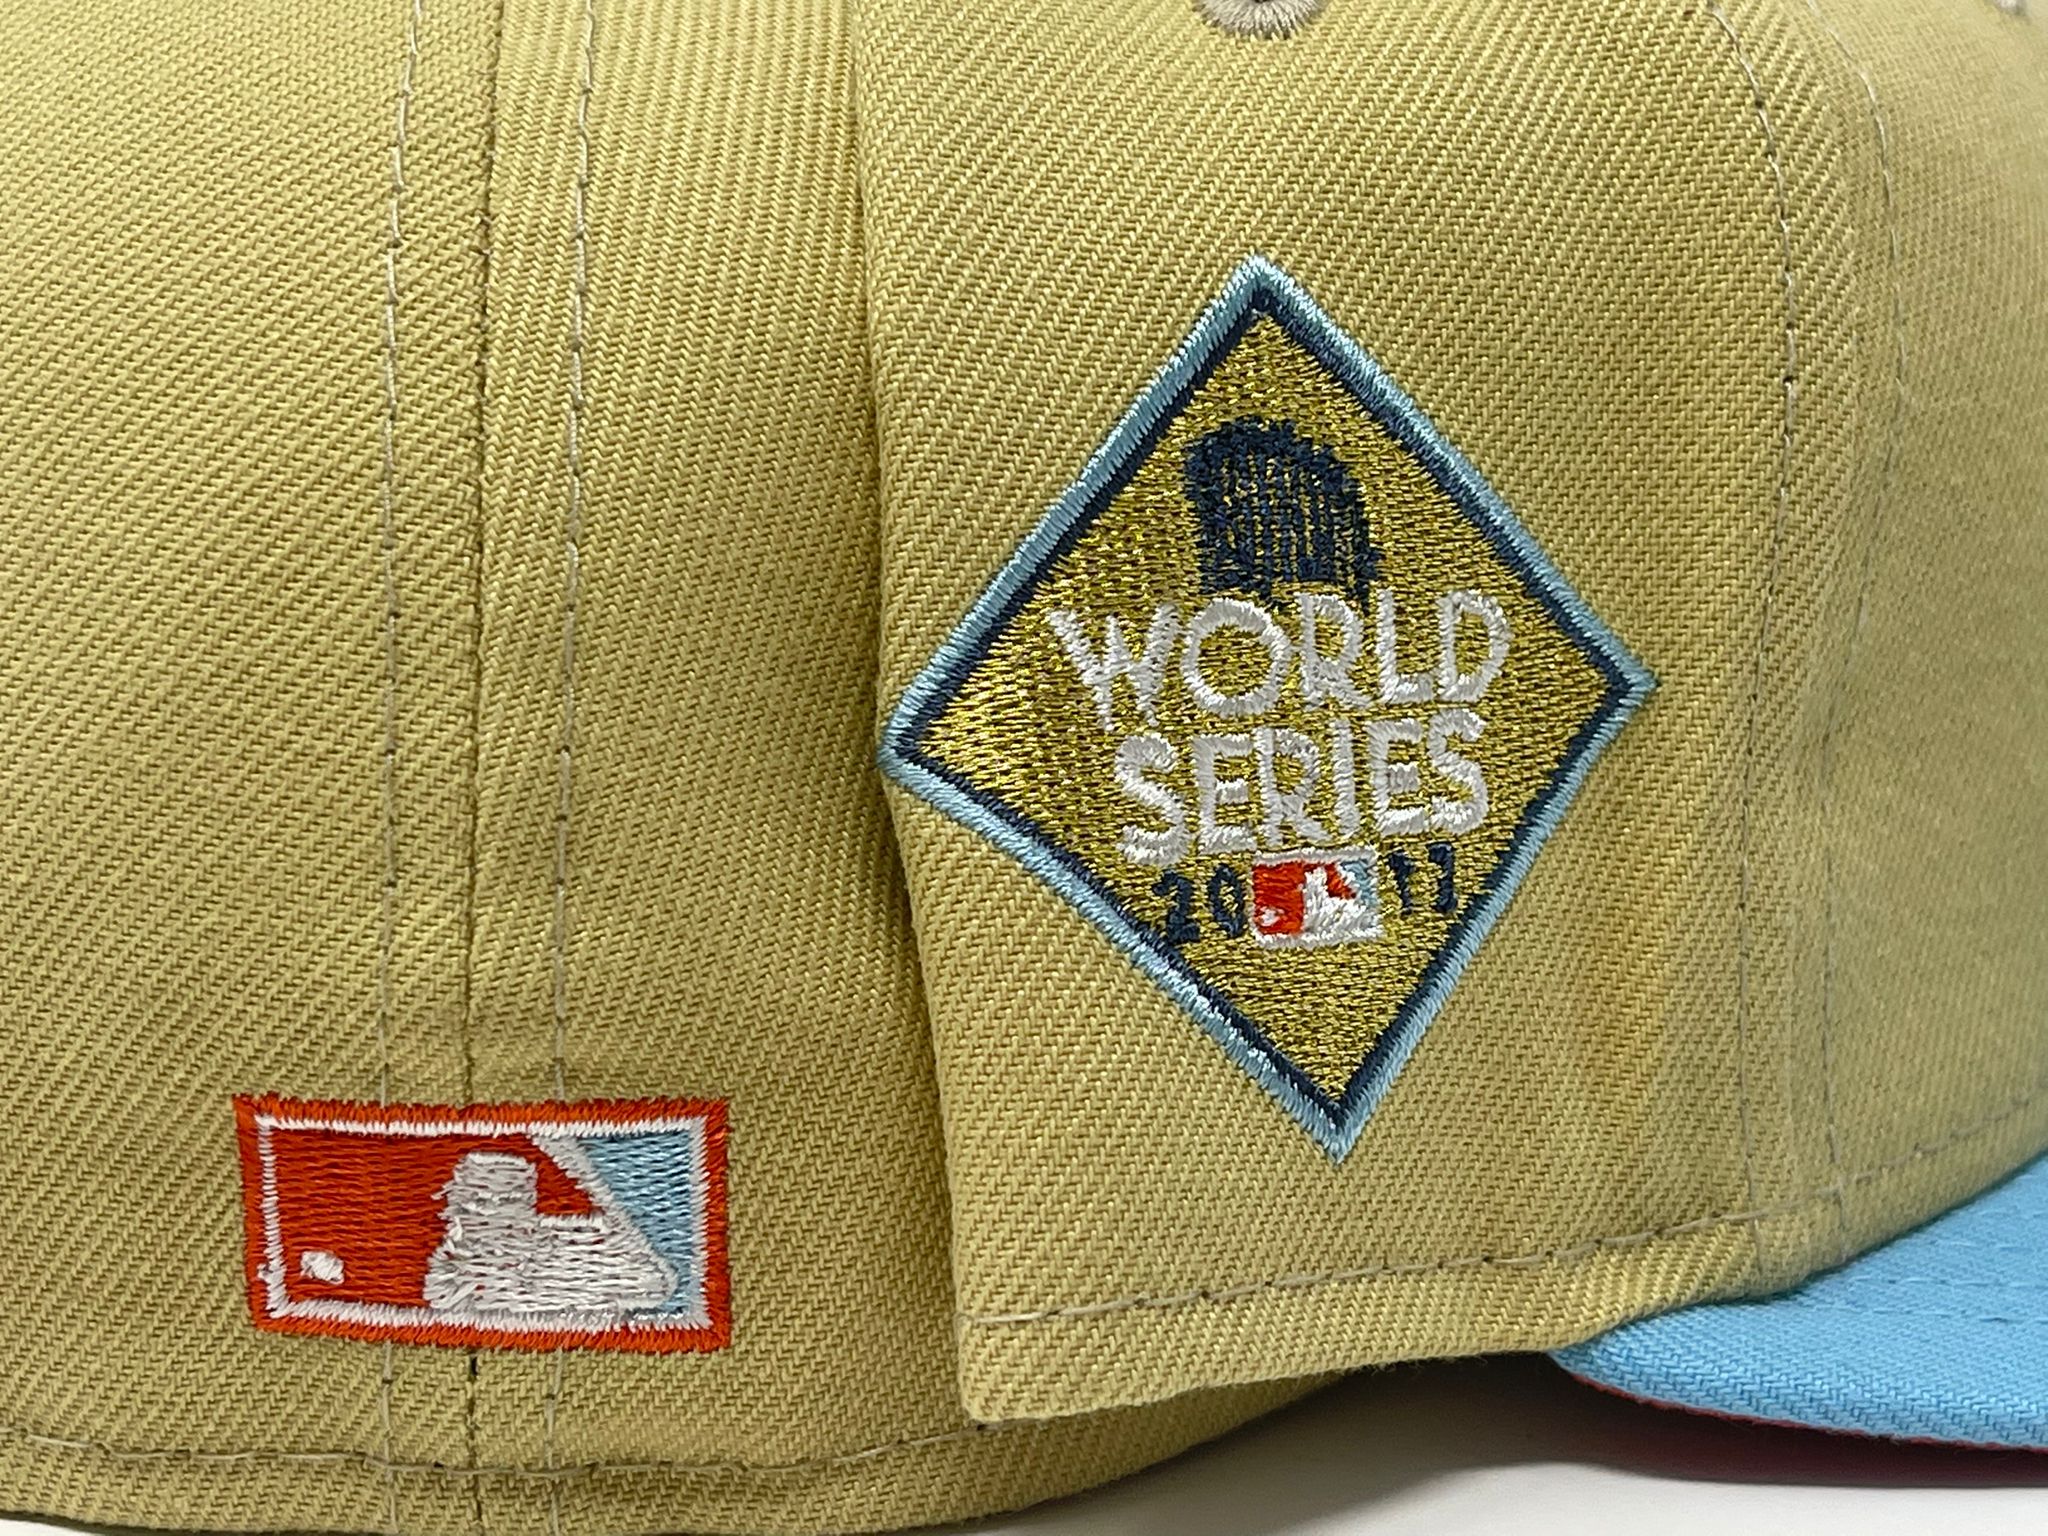 Houston Astros World Series new gold rush jersey and hat release #ad # goldrush 